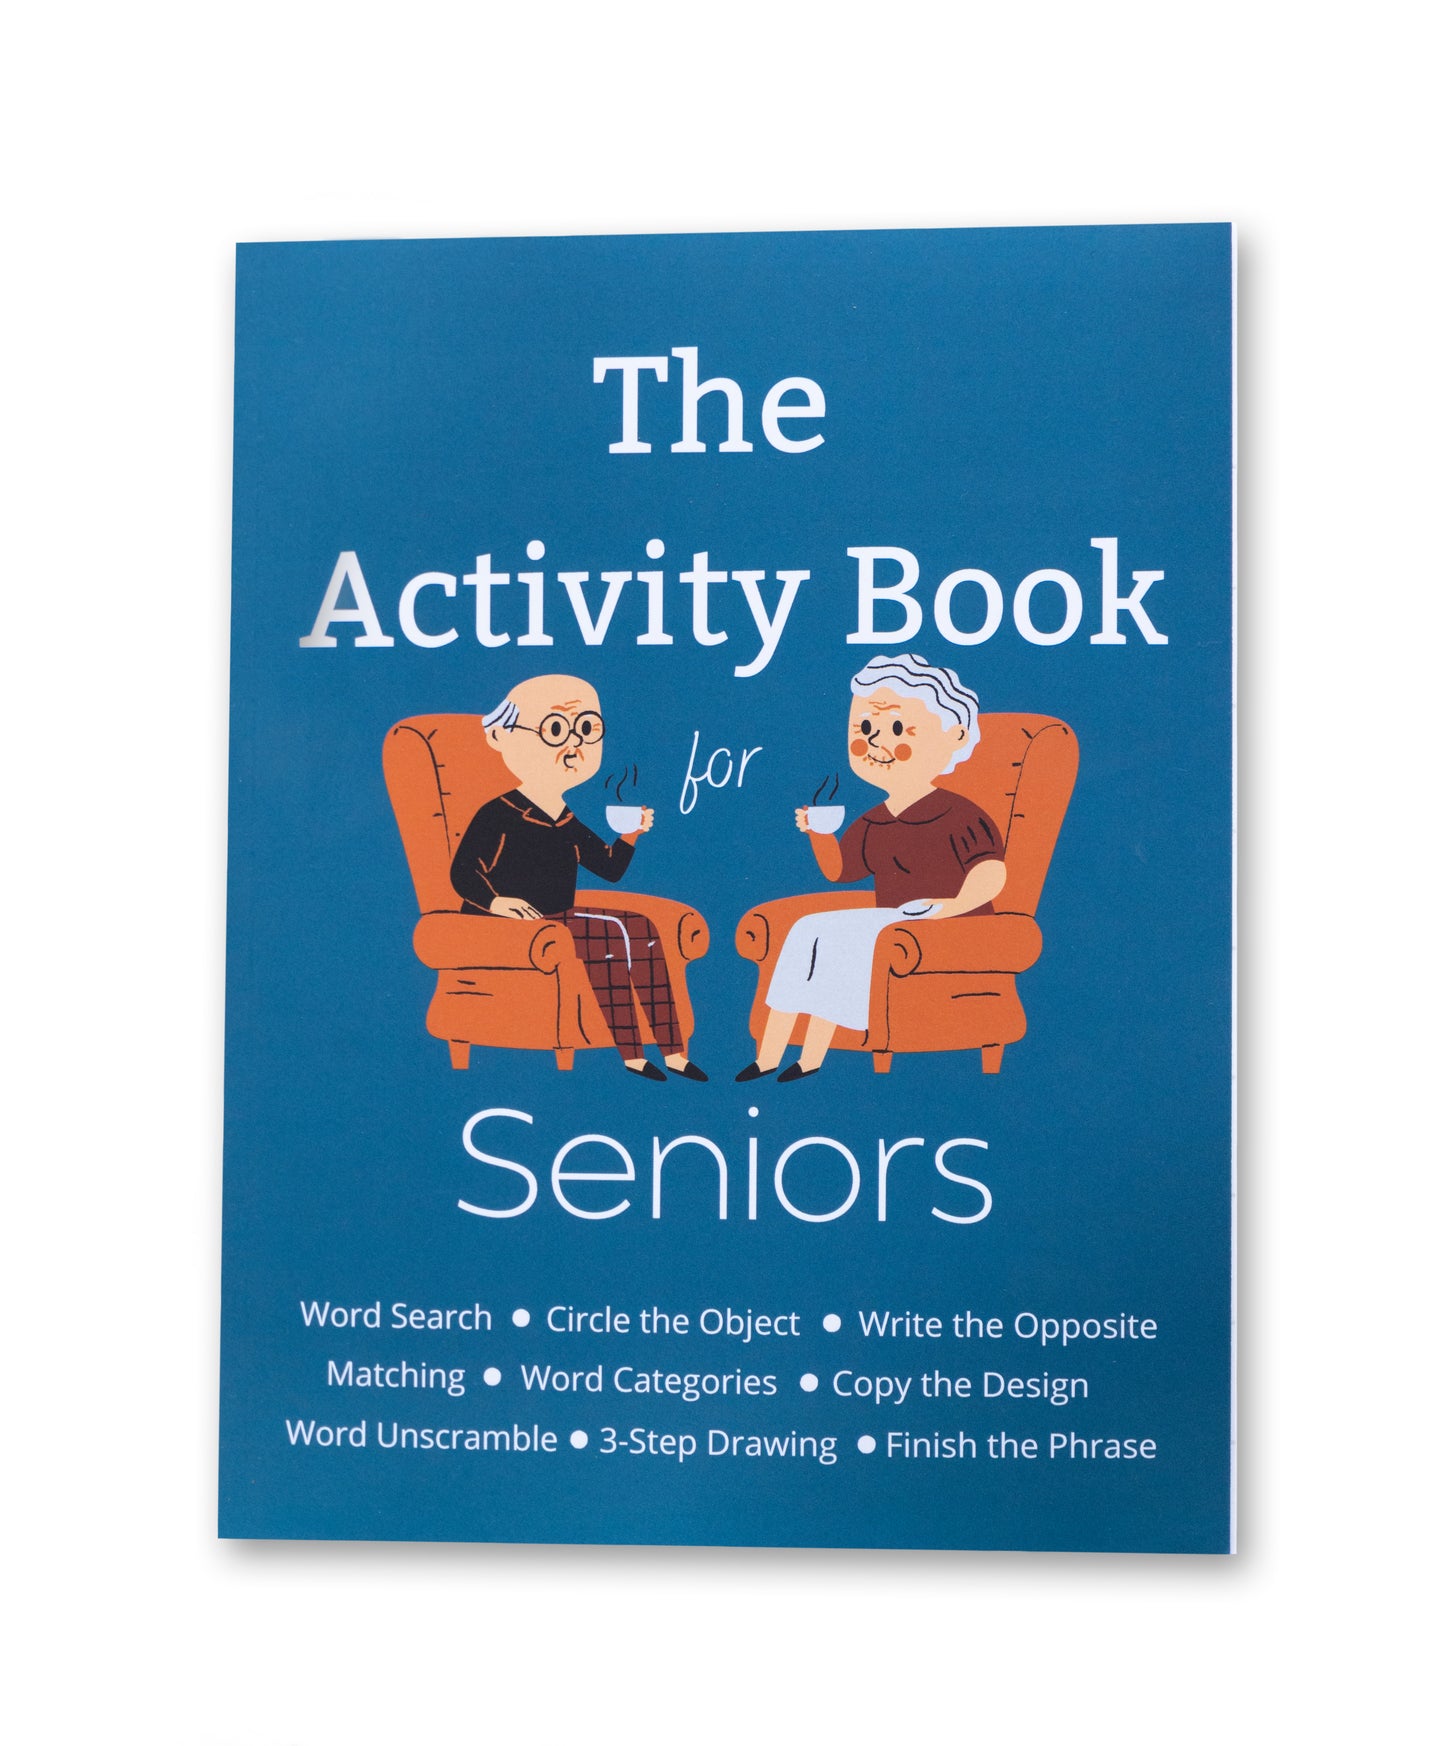 The Activity Book for Seniors